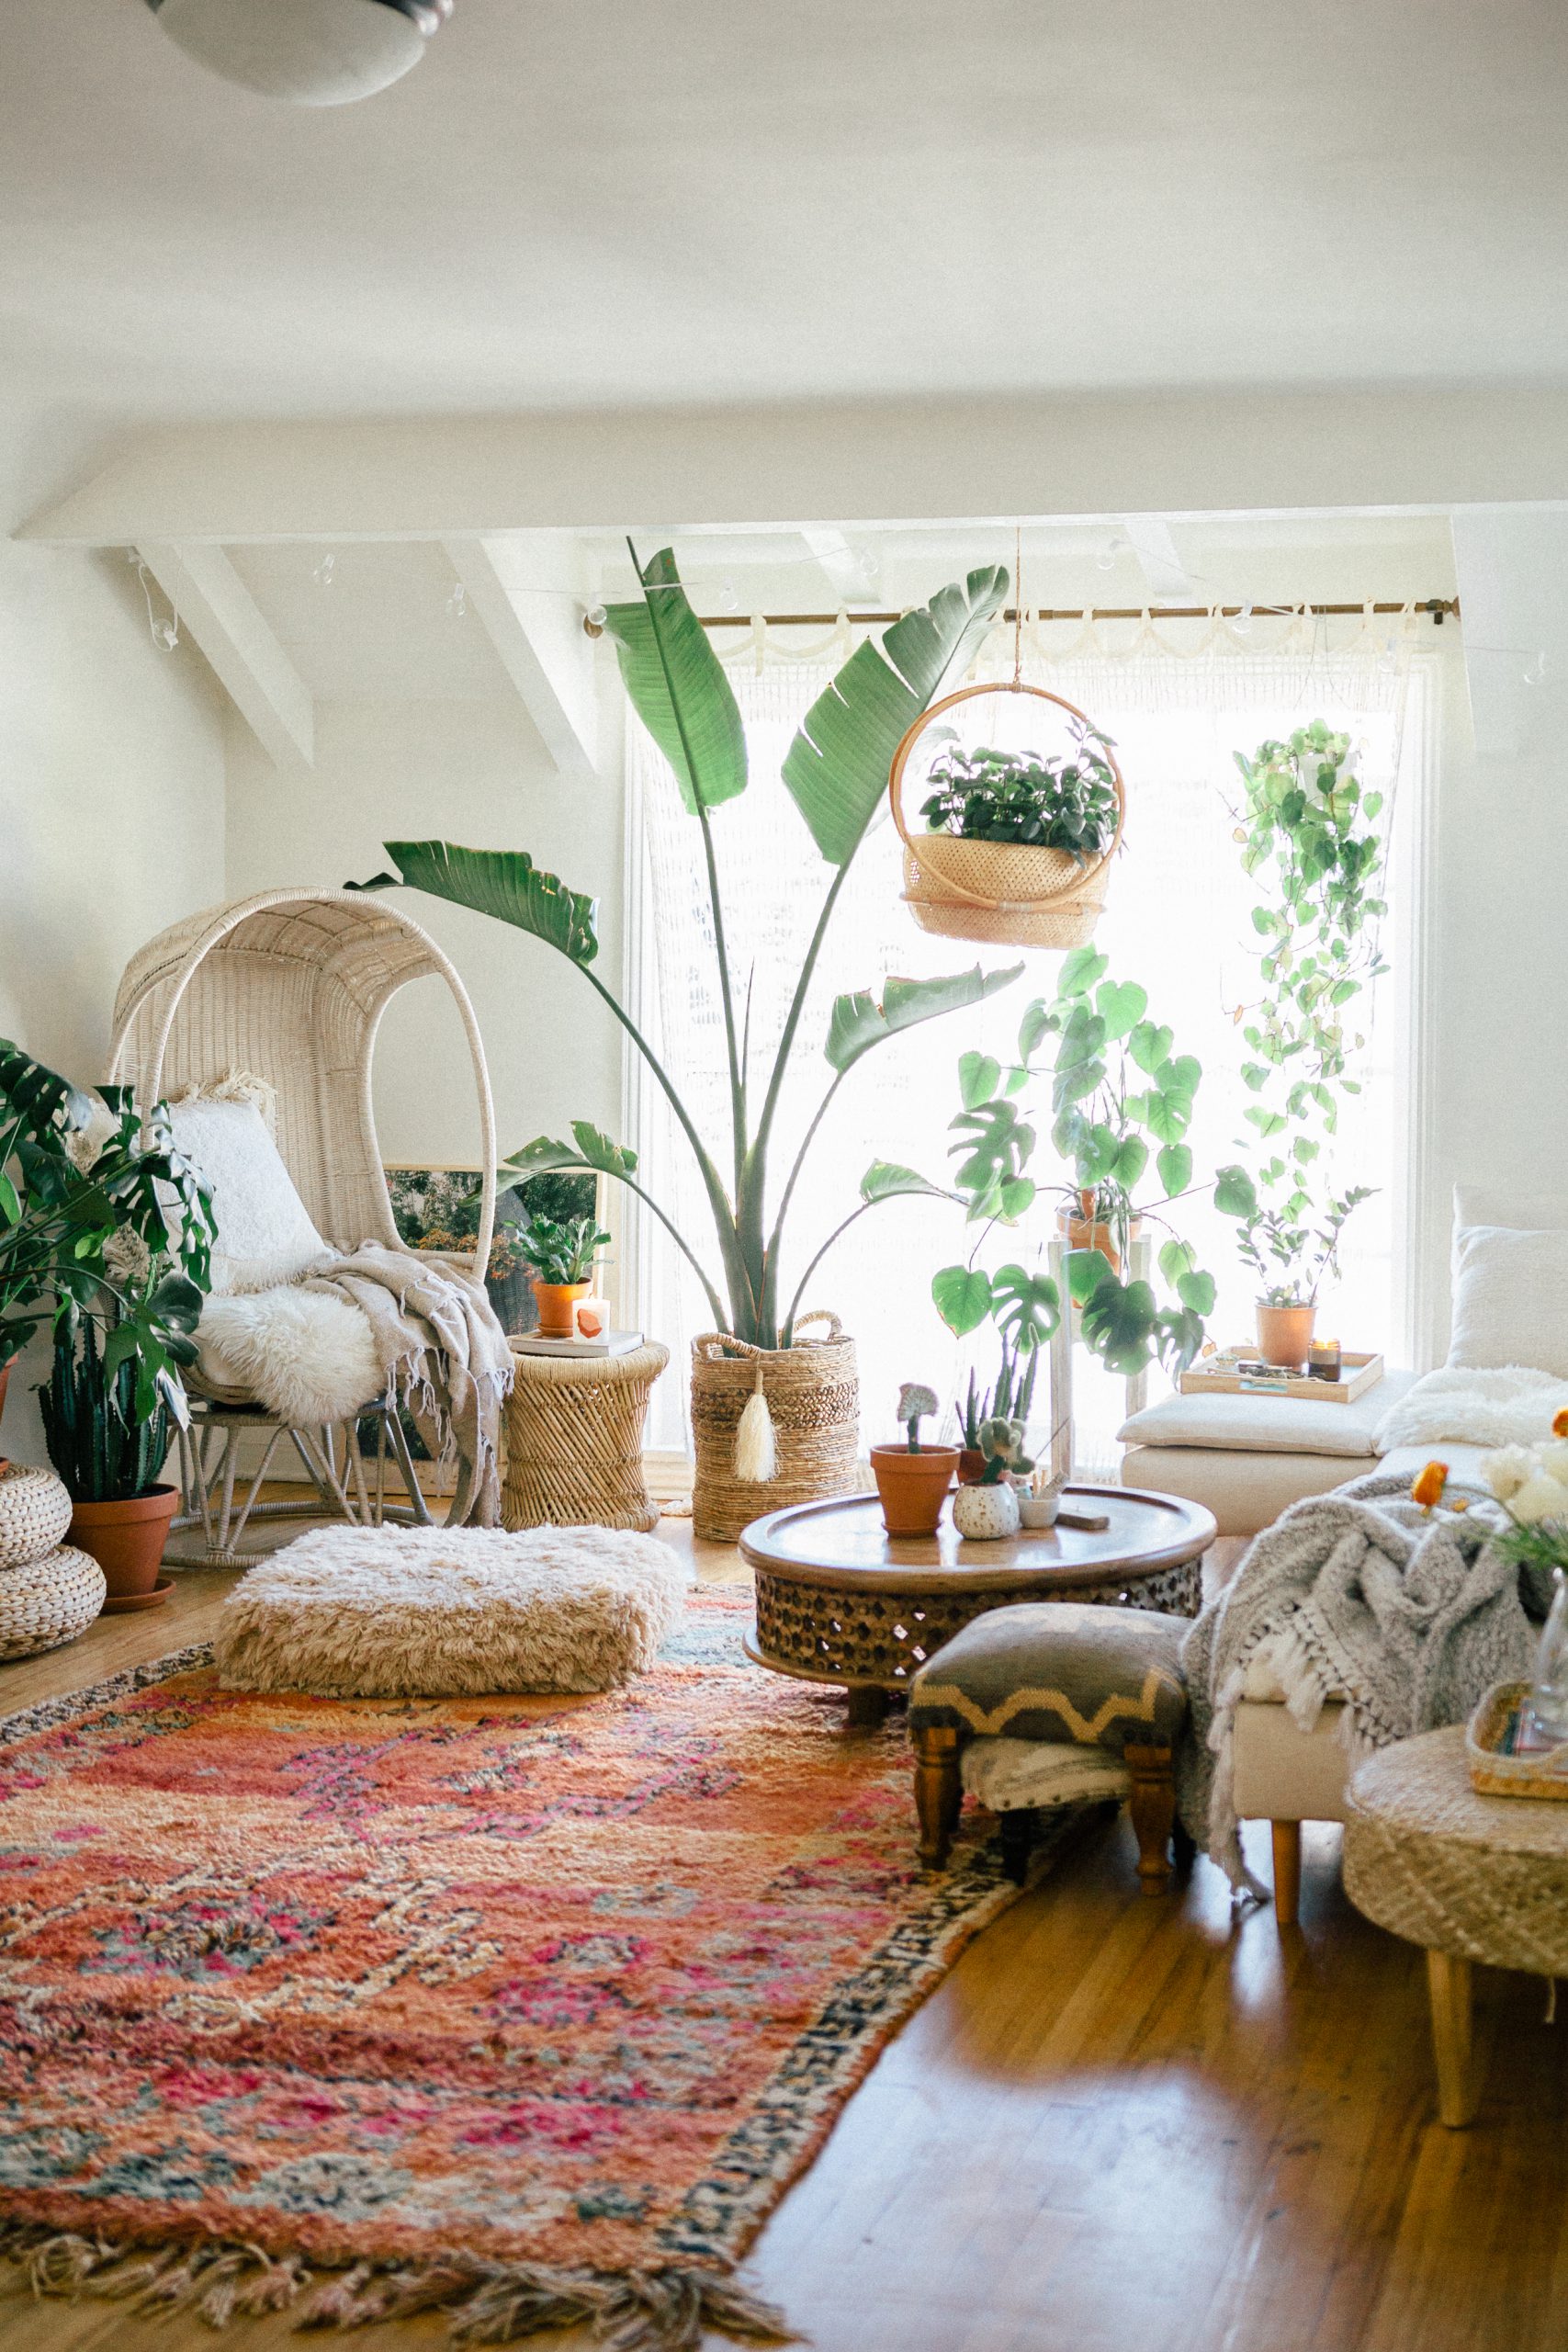 The Bohemian Open Space Concept Bedroom